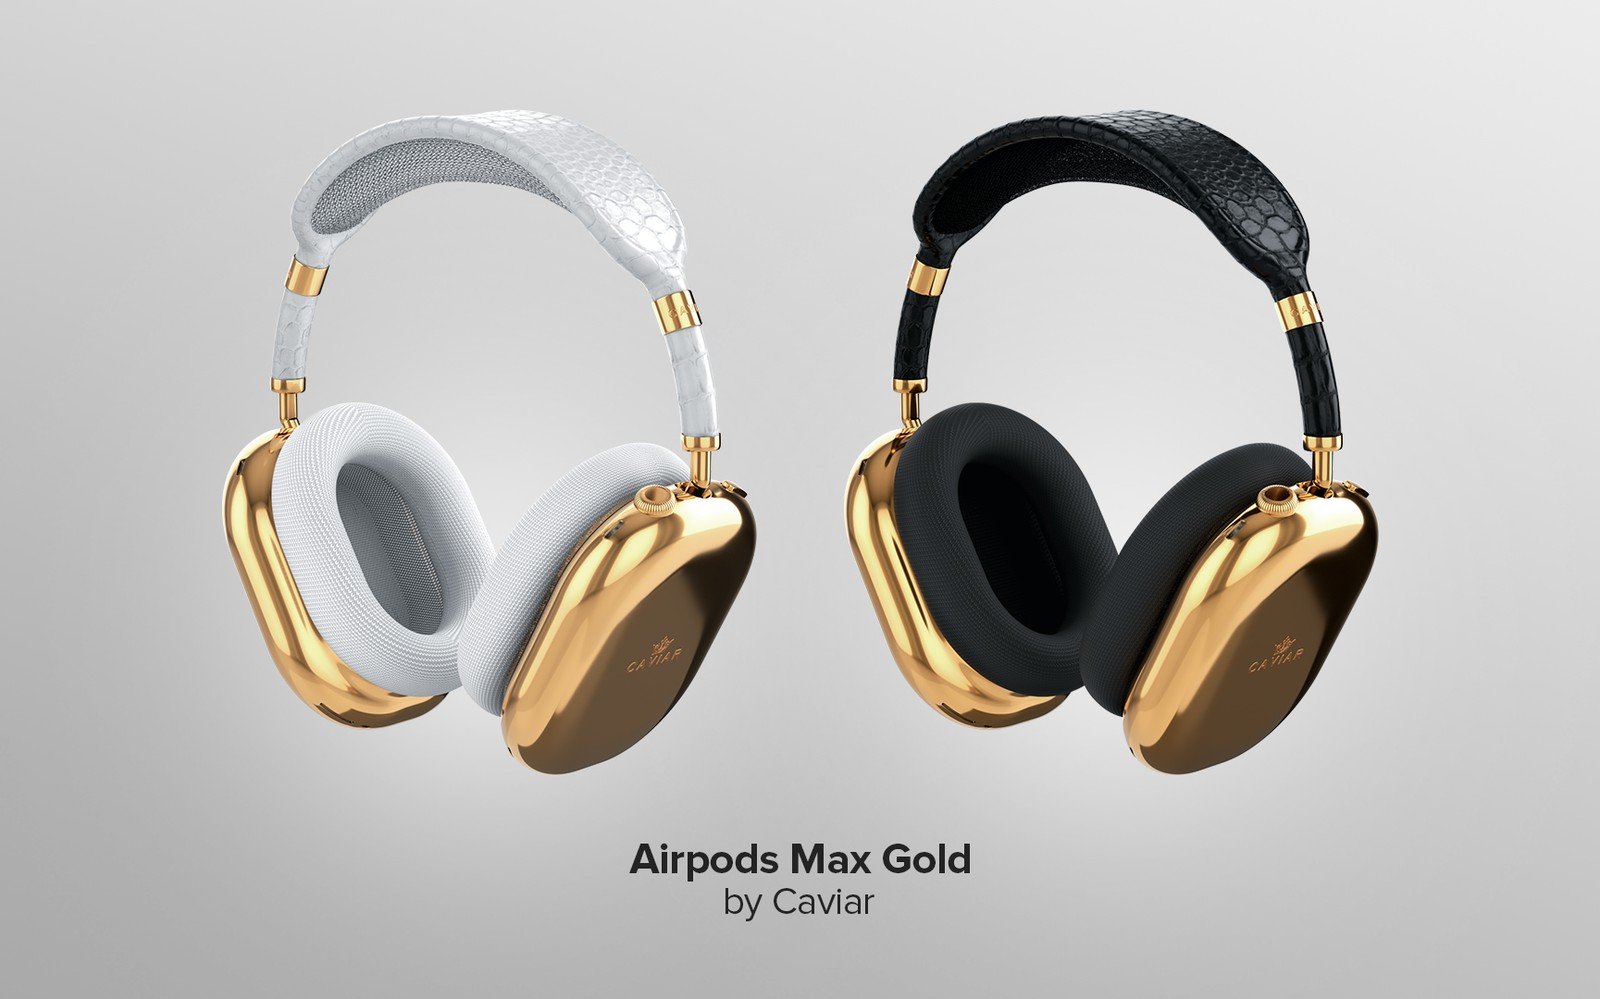 Apple AirPods Max now arrives in $108K ‘Pure Gold’ custom edition from